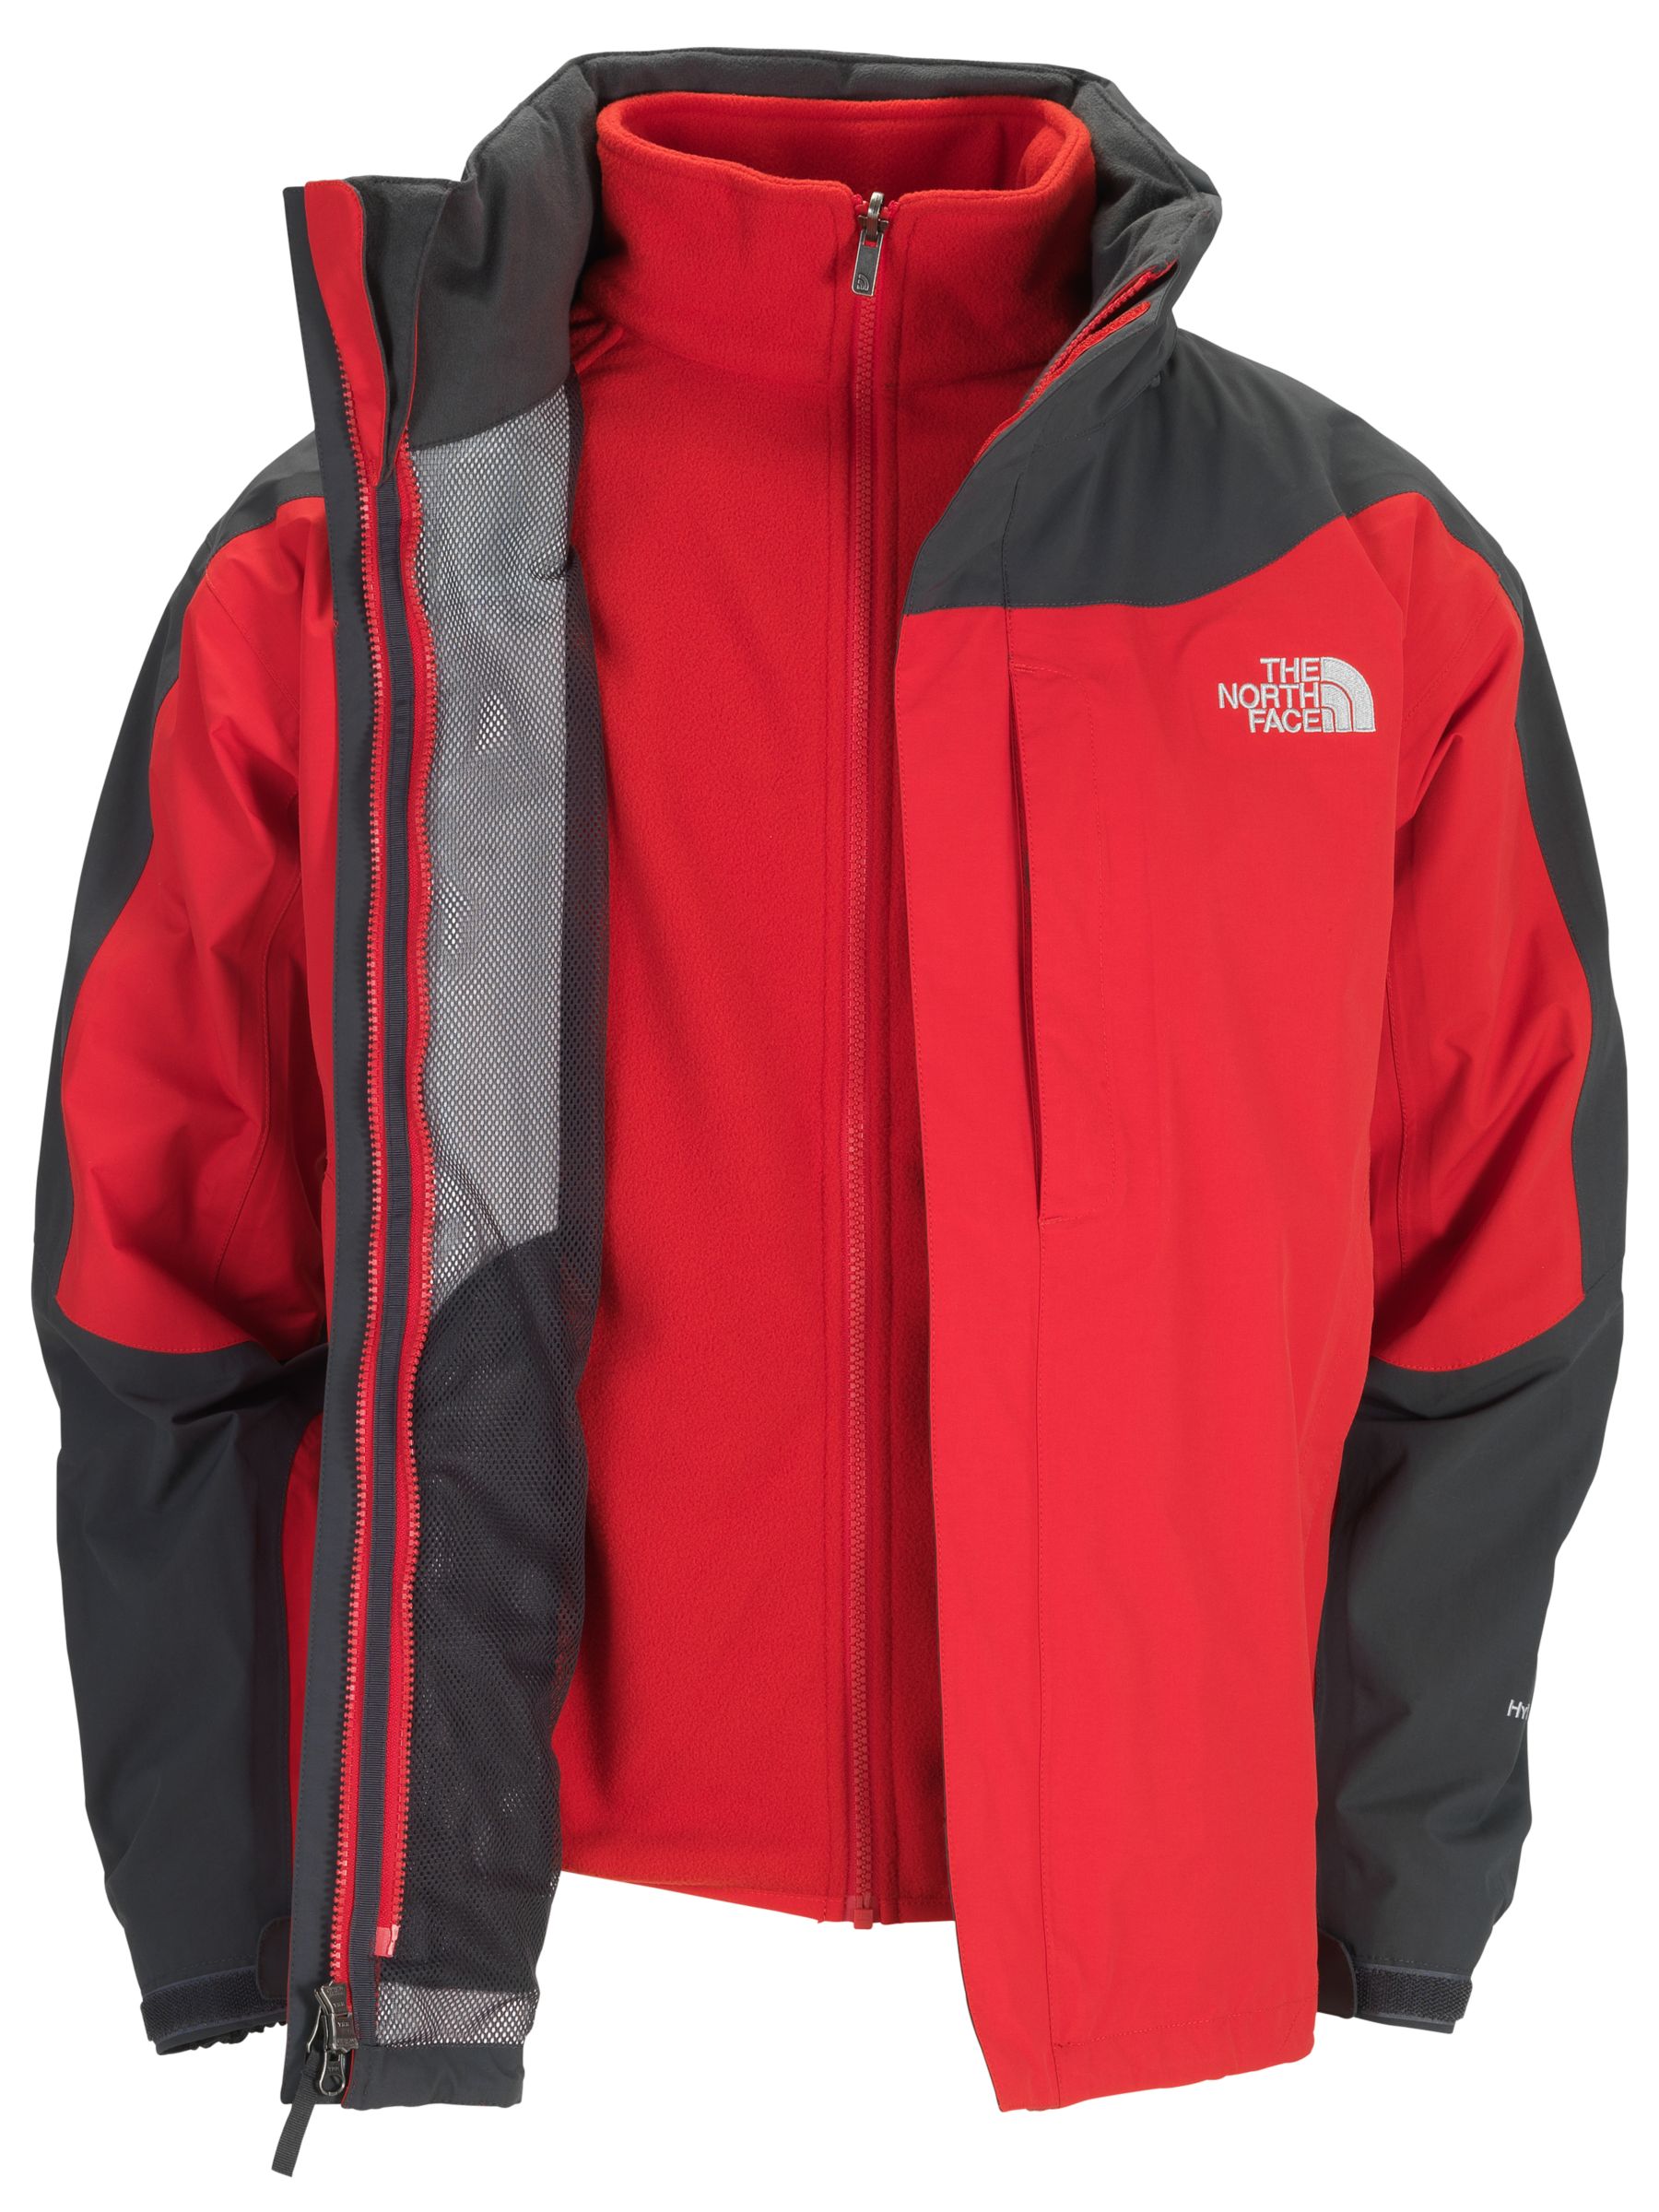 The North Face Men's Evolution Triclimate Jacket, Red/Grey at John Lewis